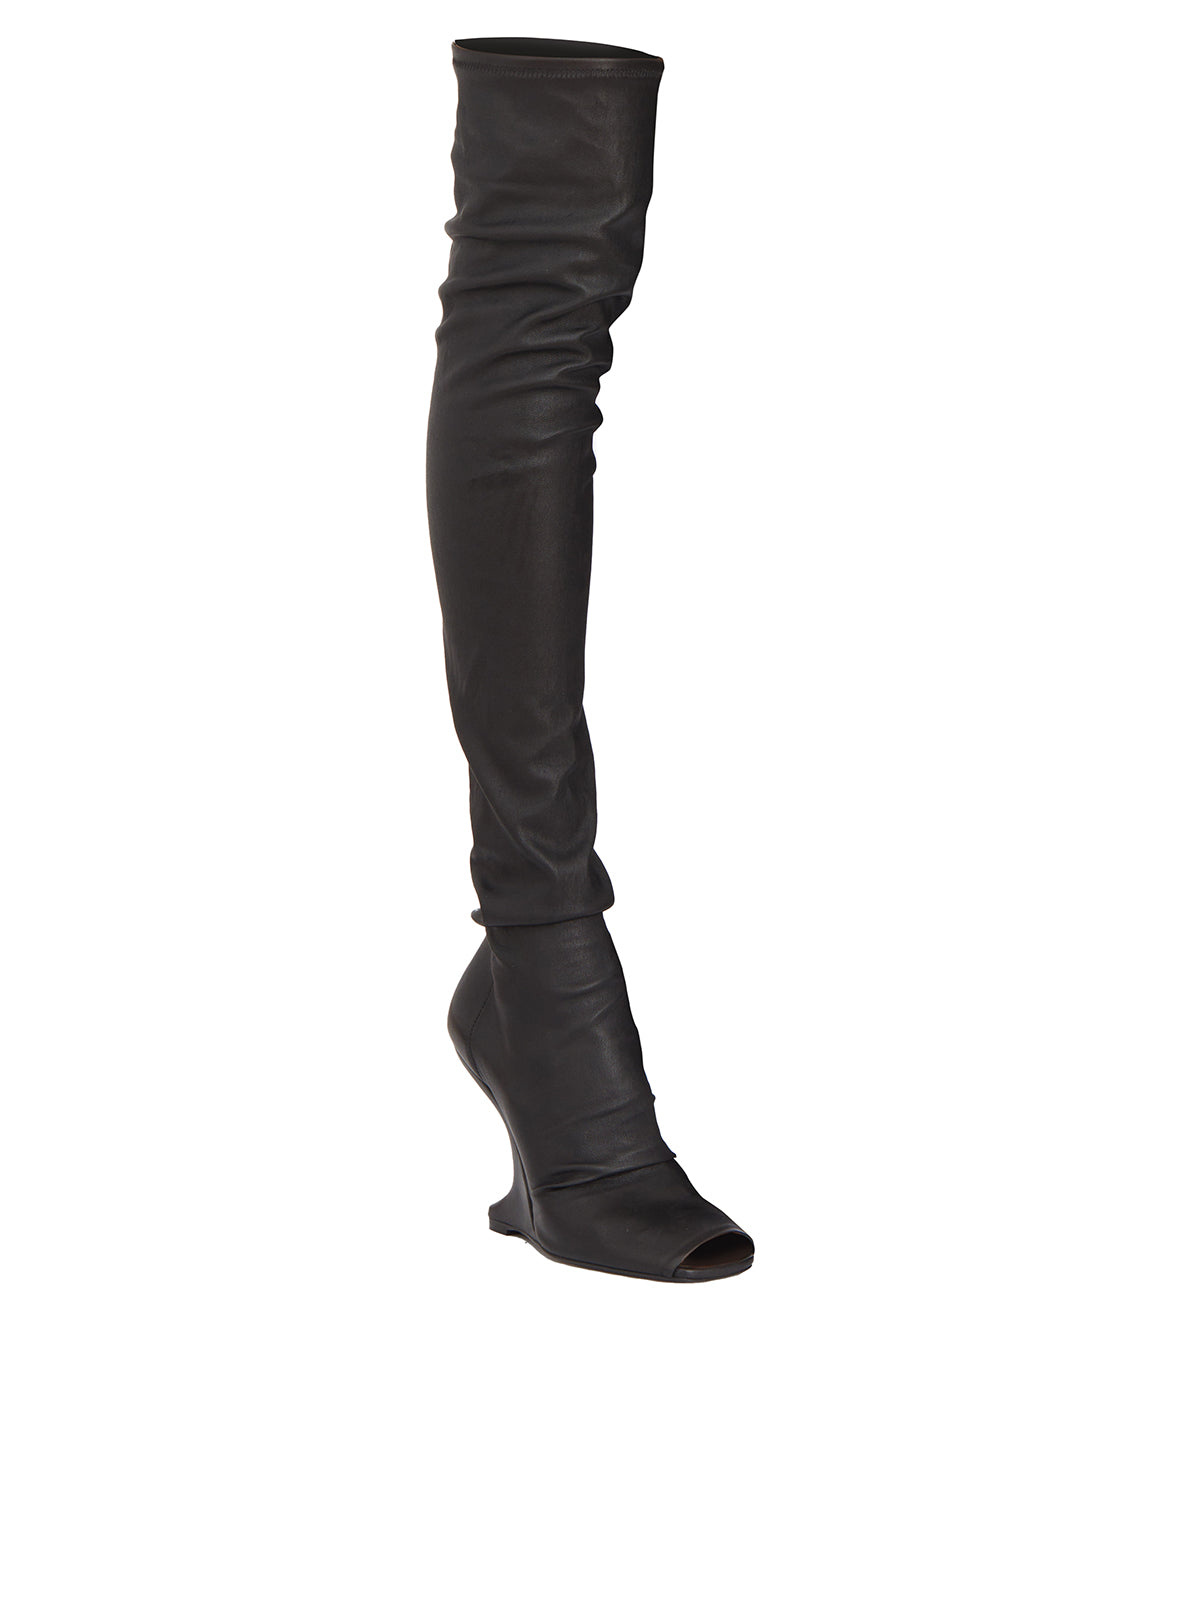 RICKOWENSLILIES Black Leather Cantilever Boots for Fashion-Forward Women